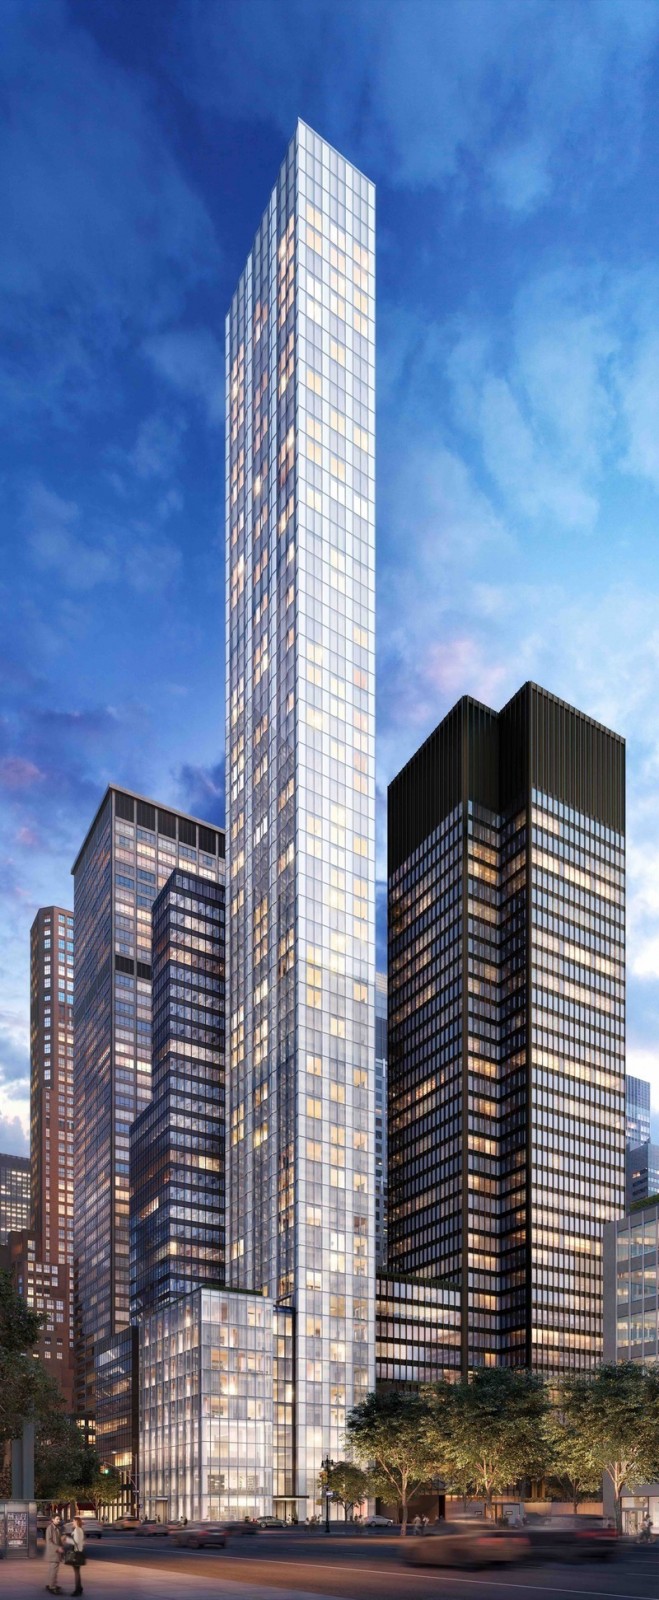 100 East 53rd Street is next to the Seagram's Building